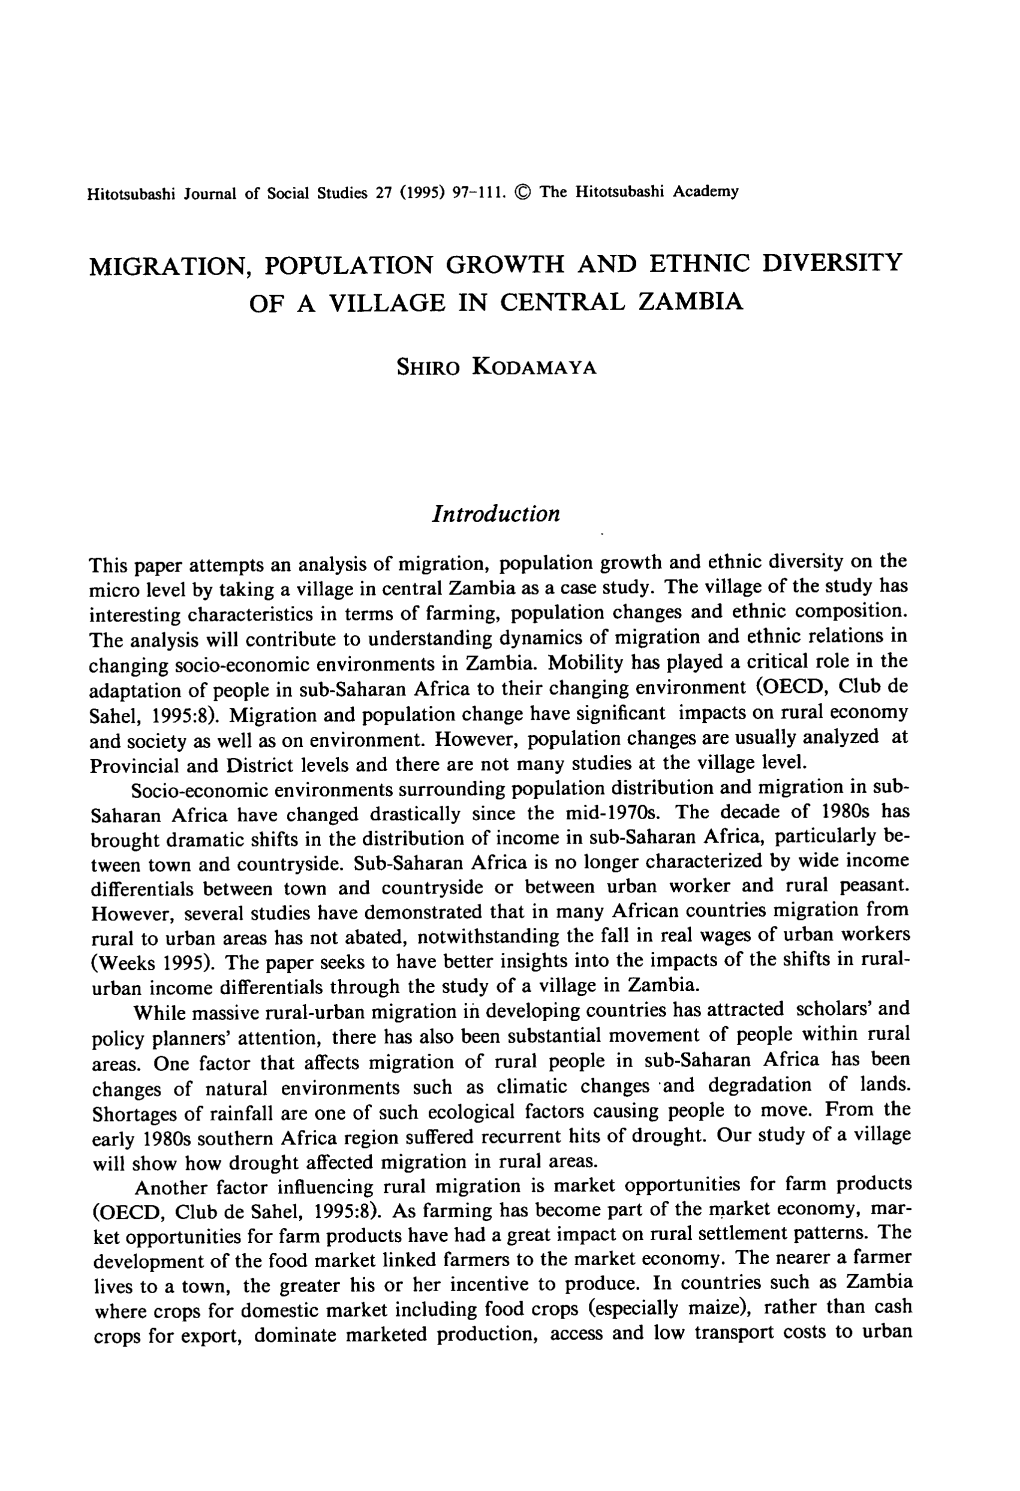 Migration, Population Growth and Ethnic Diversity of a Village in Central Zambia